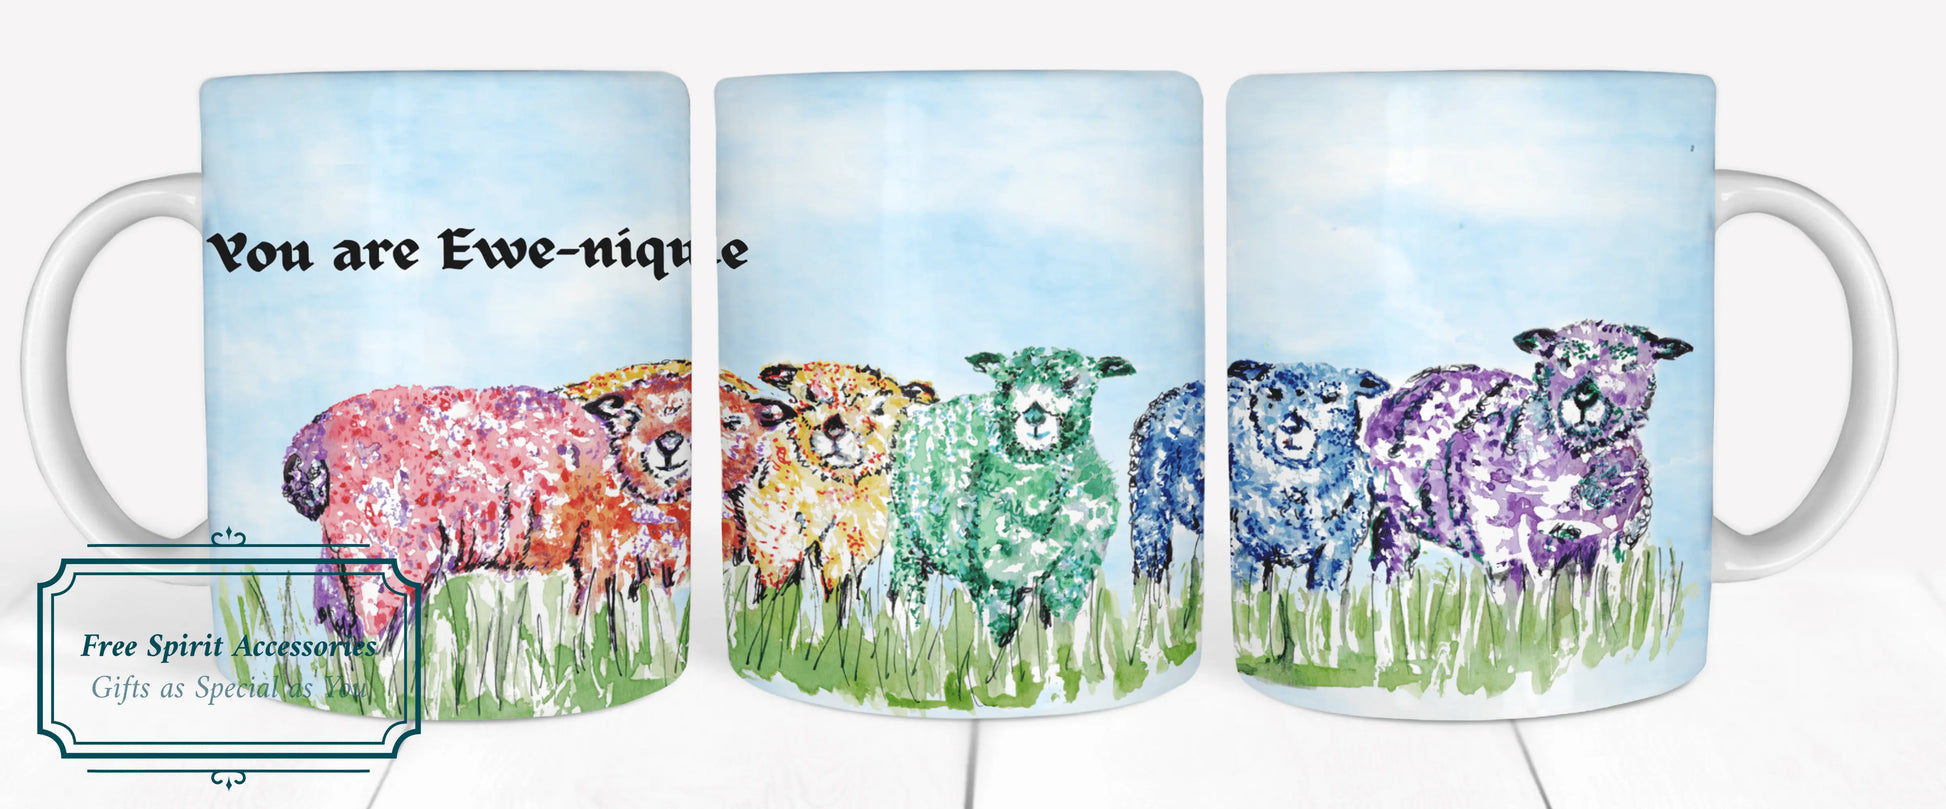 "Vibrant Ewe-nique Sheep Mug: A Rainbow of Colors for Your Sips!" - Image #1